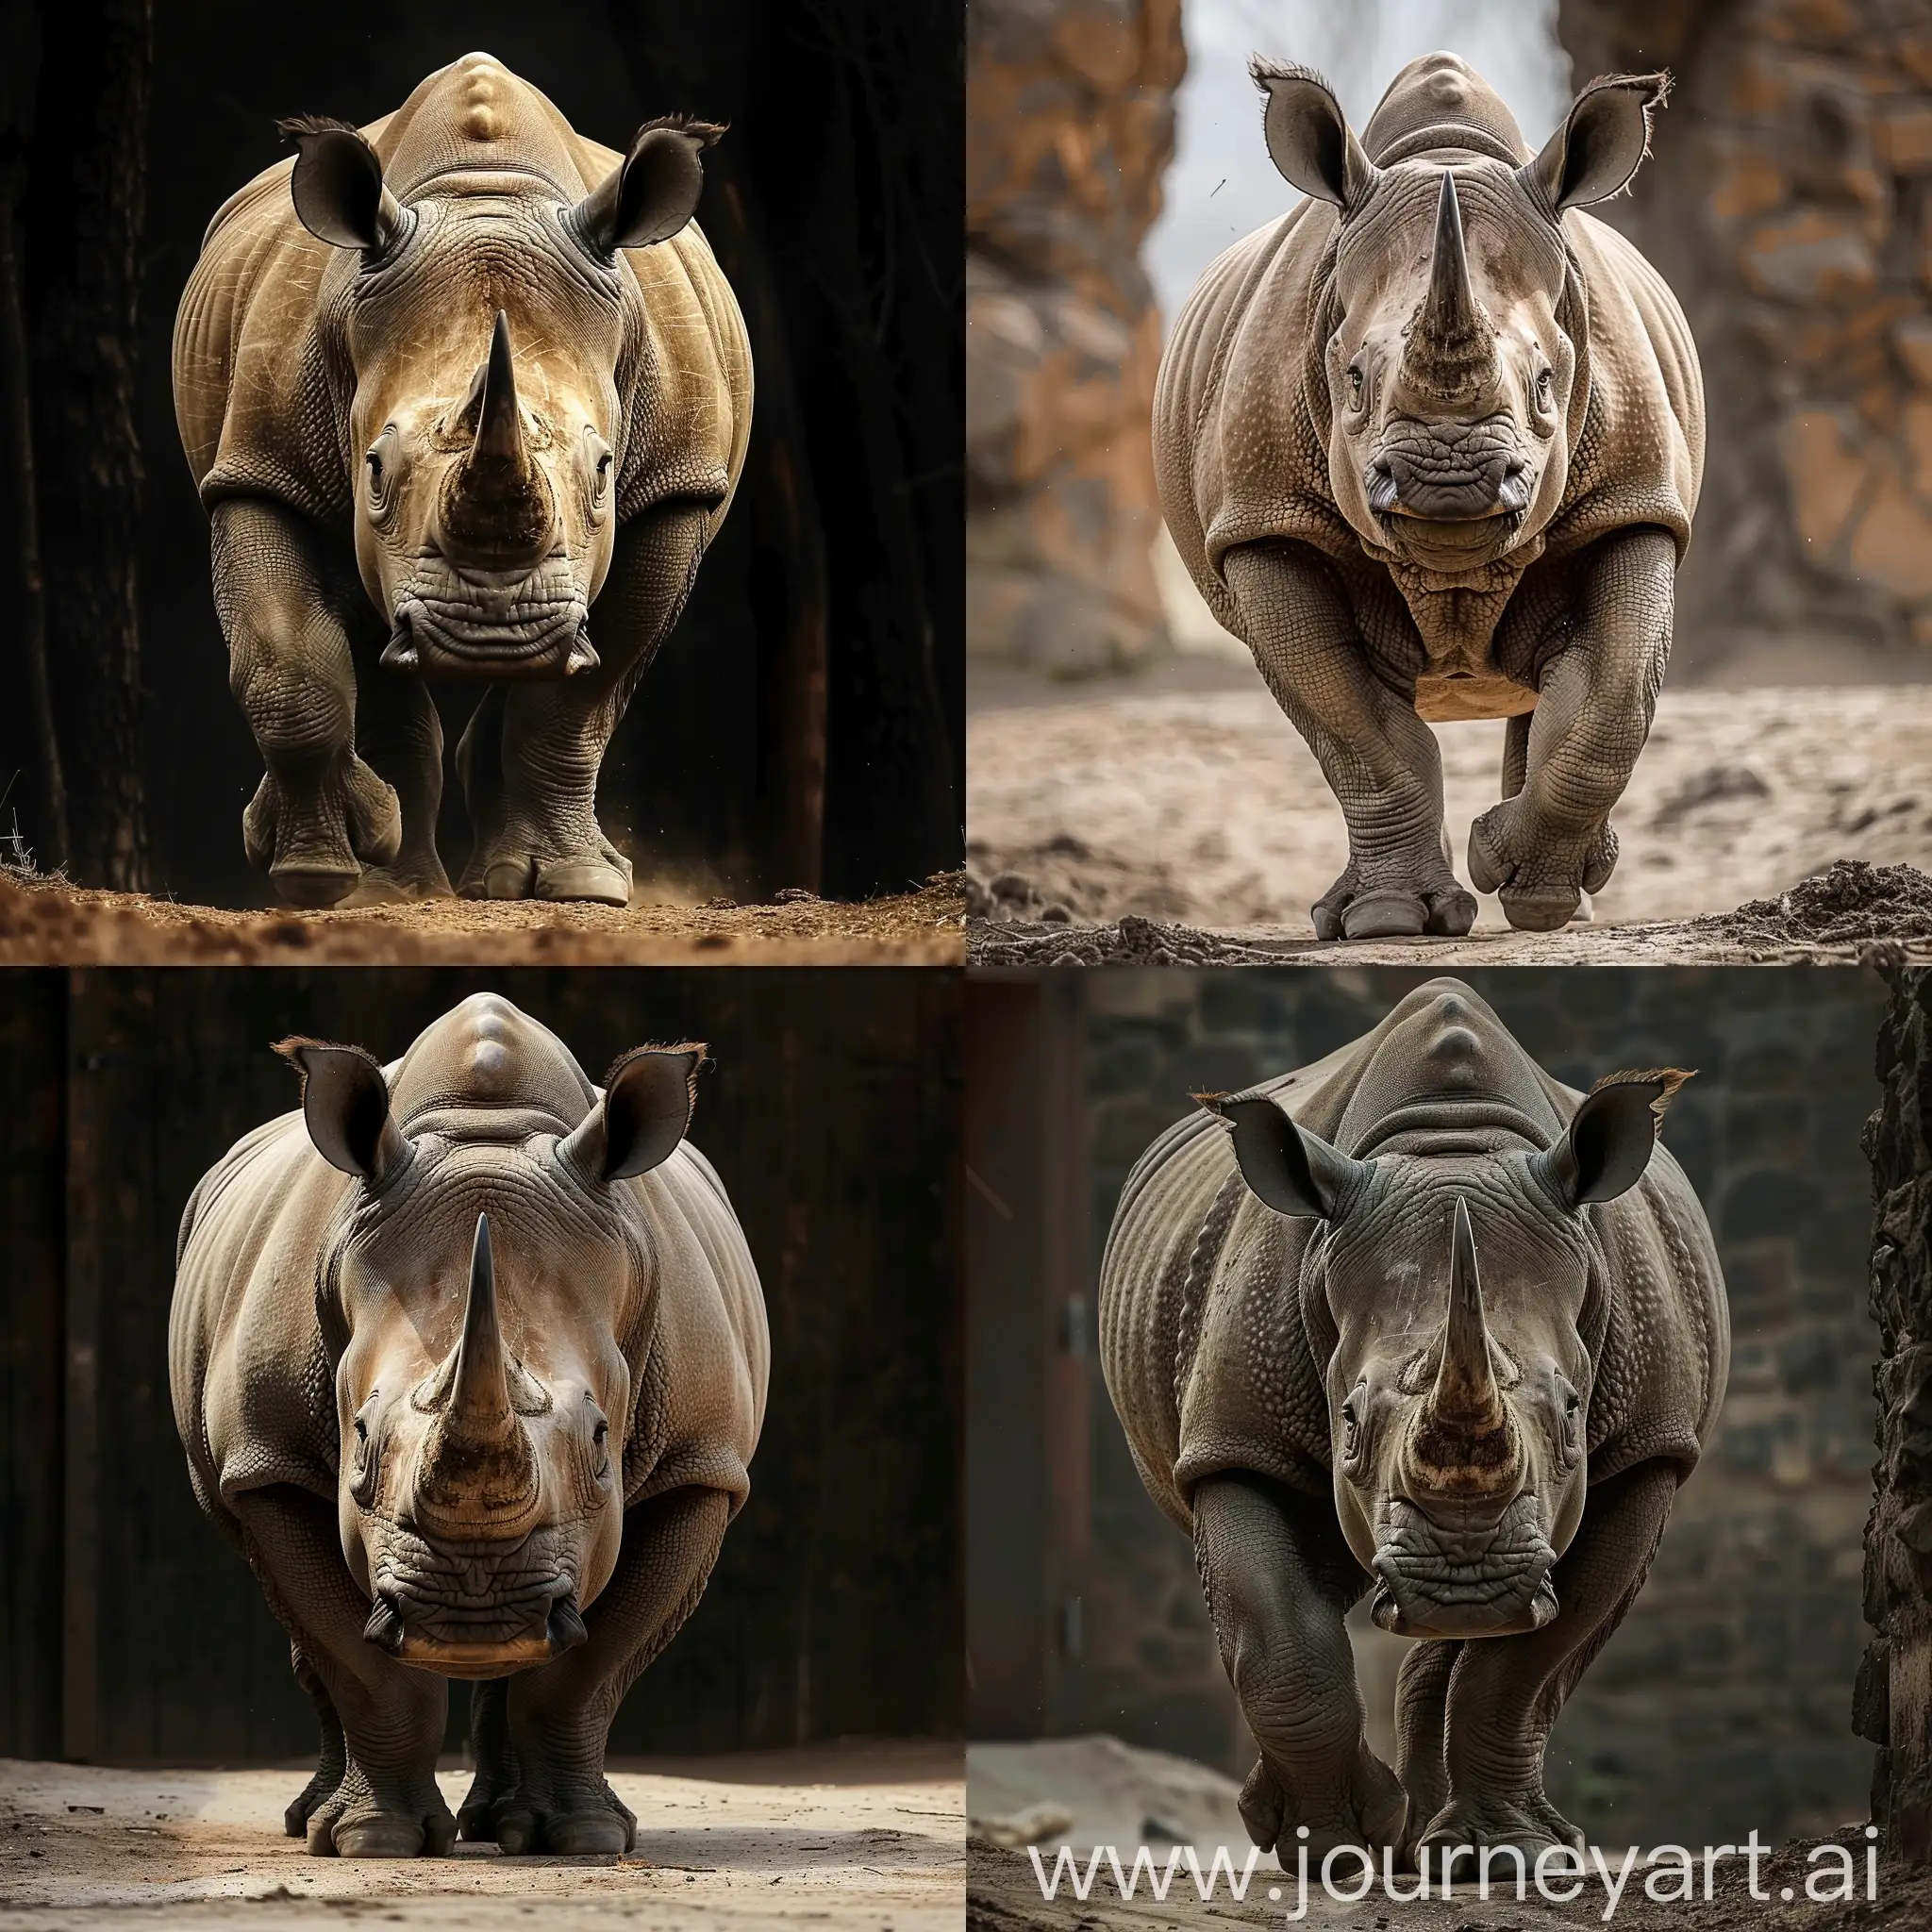 A rhinoceros, front view, majestic expression, strong, light perception